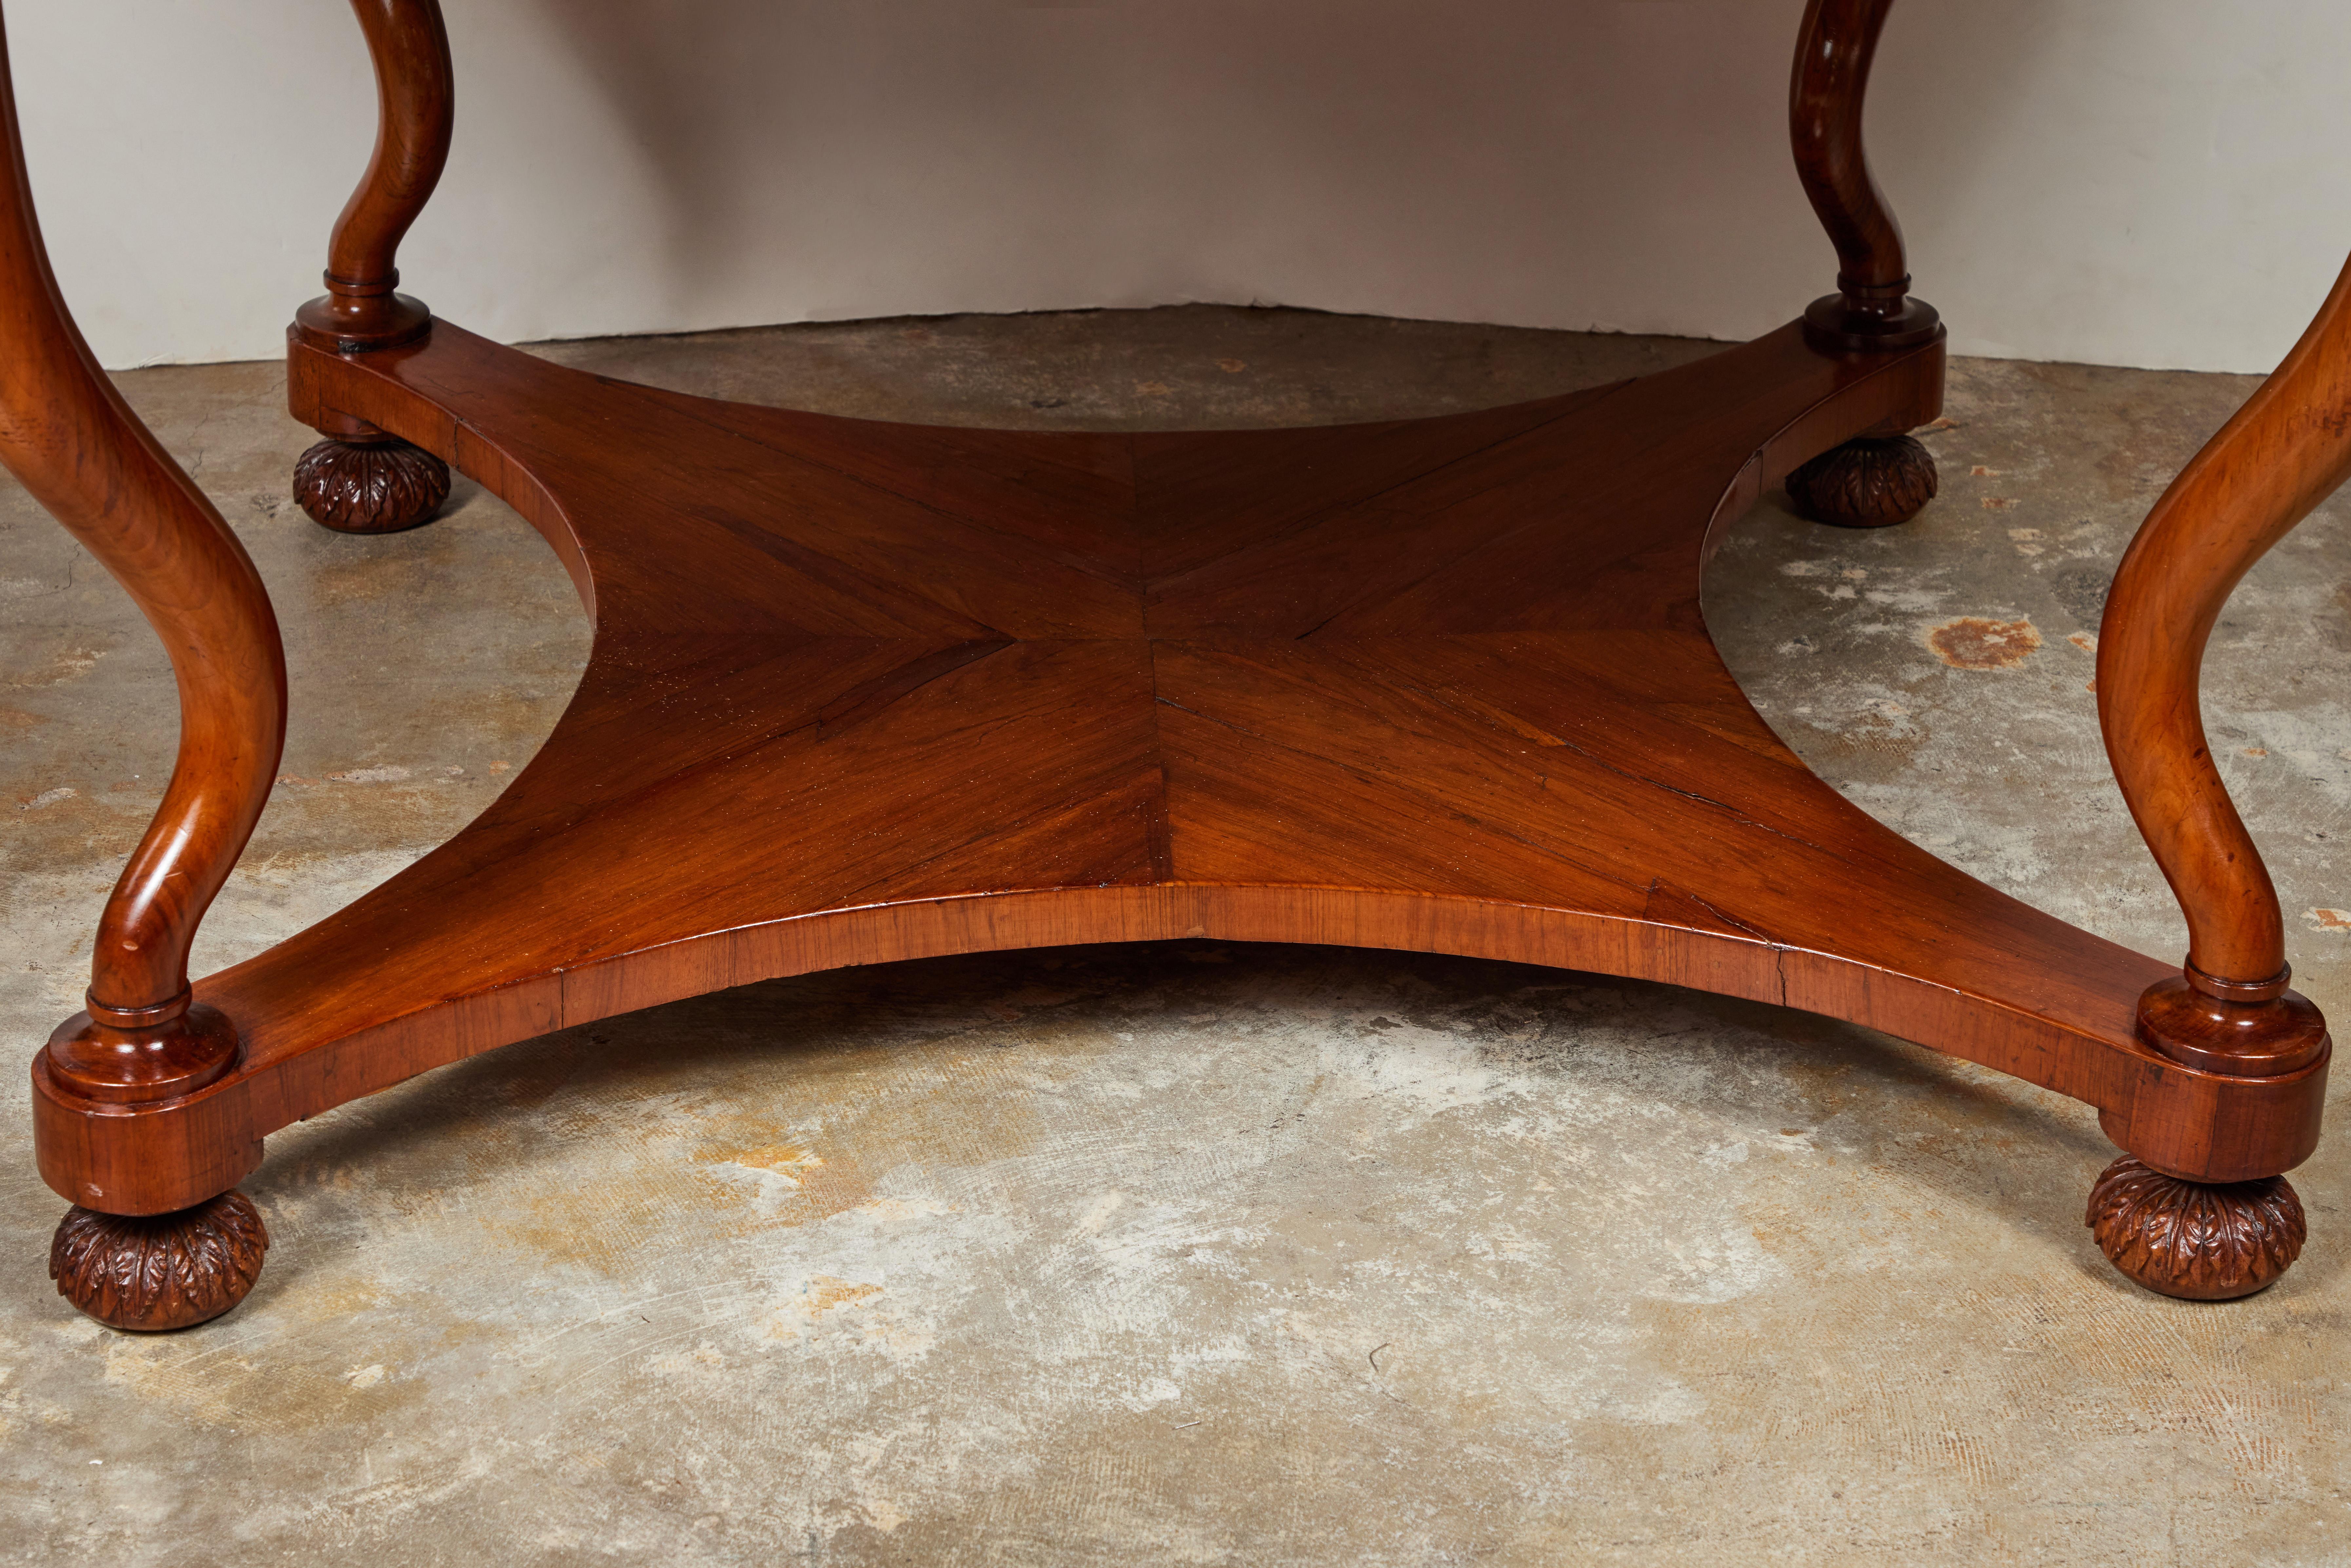 Hand-Carved c. 1840, Tuscan Center Table